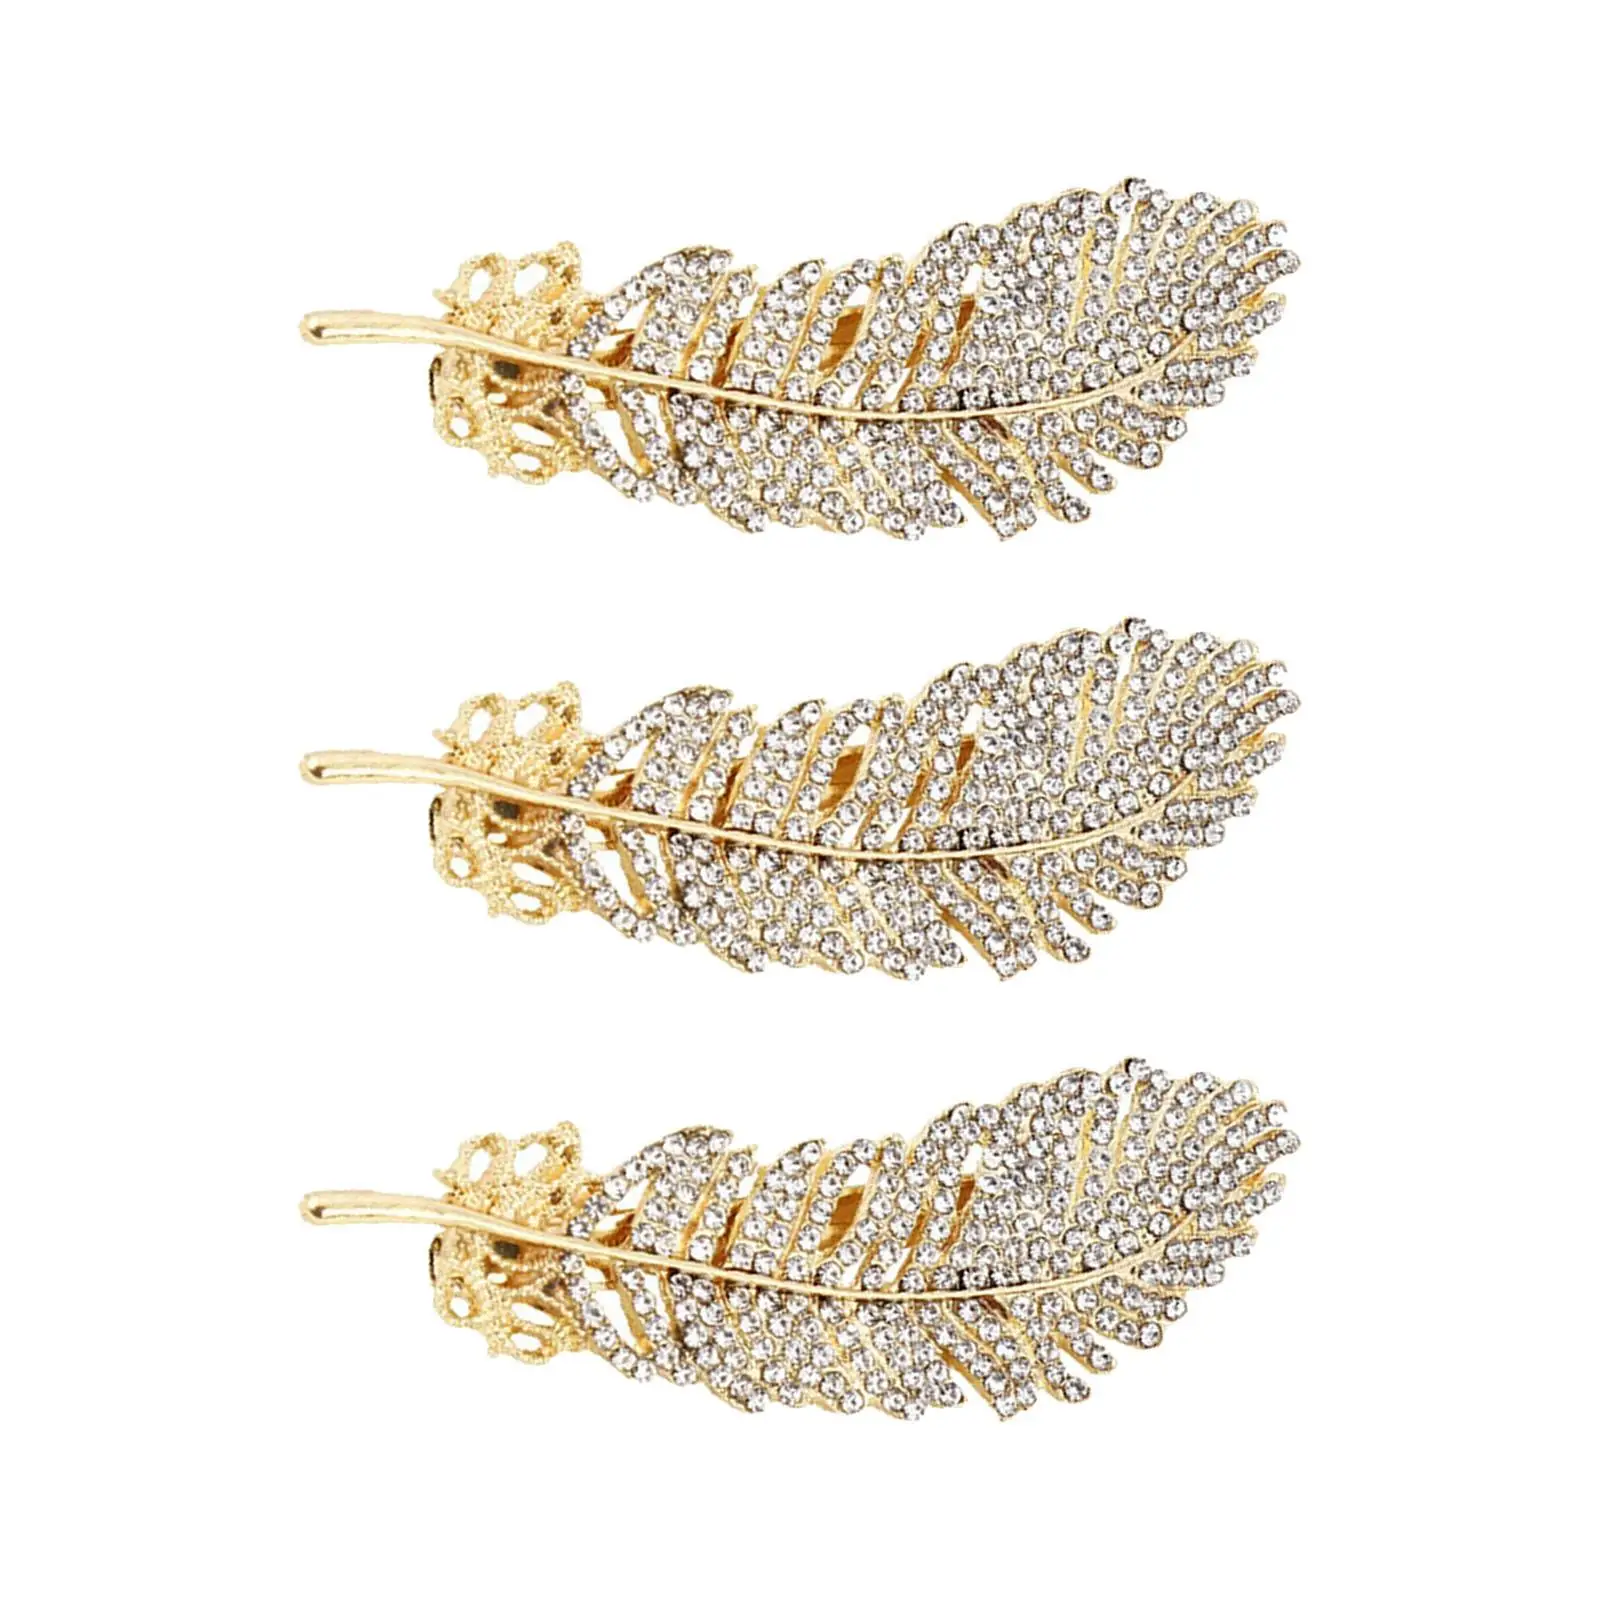 3x Vintage Alloy Hair Clips Headdress Hairpin Sparkling for Daily Wedding